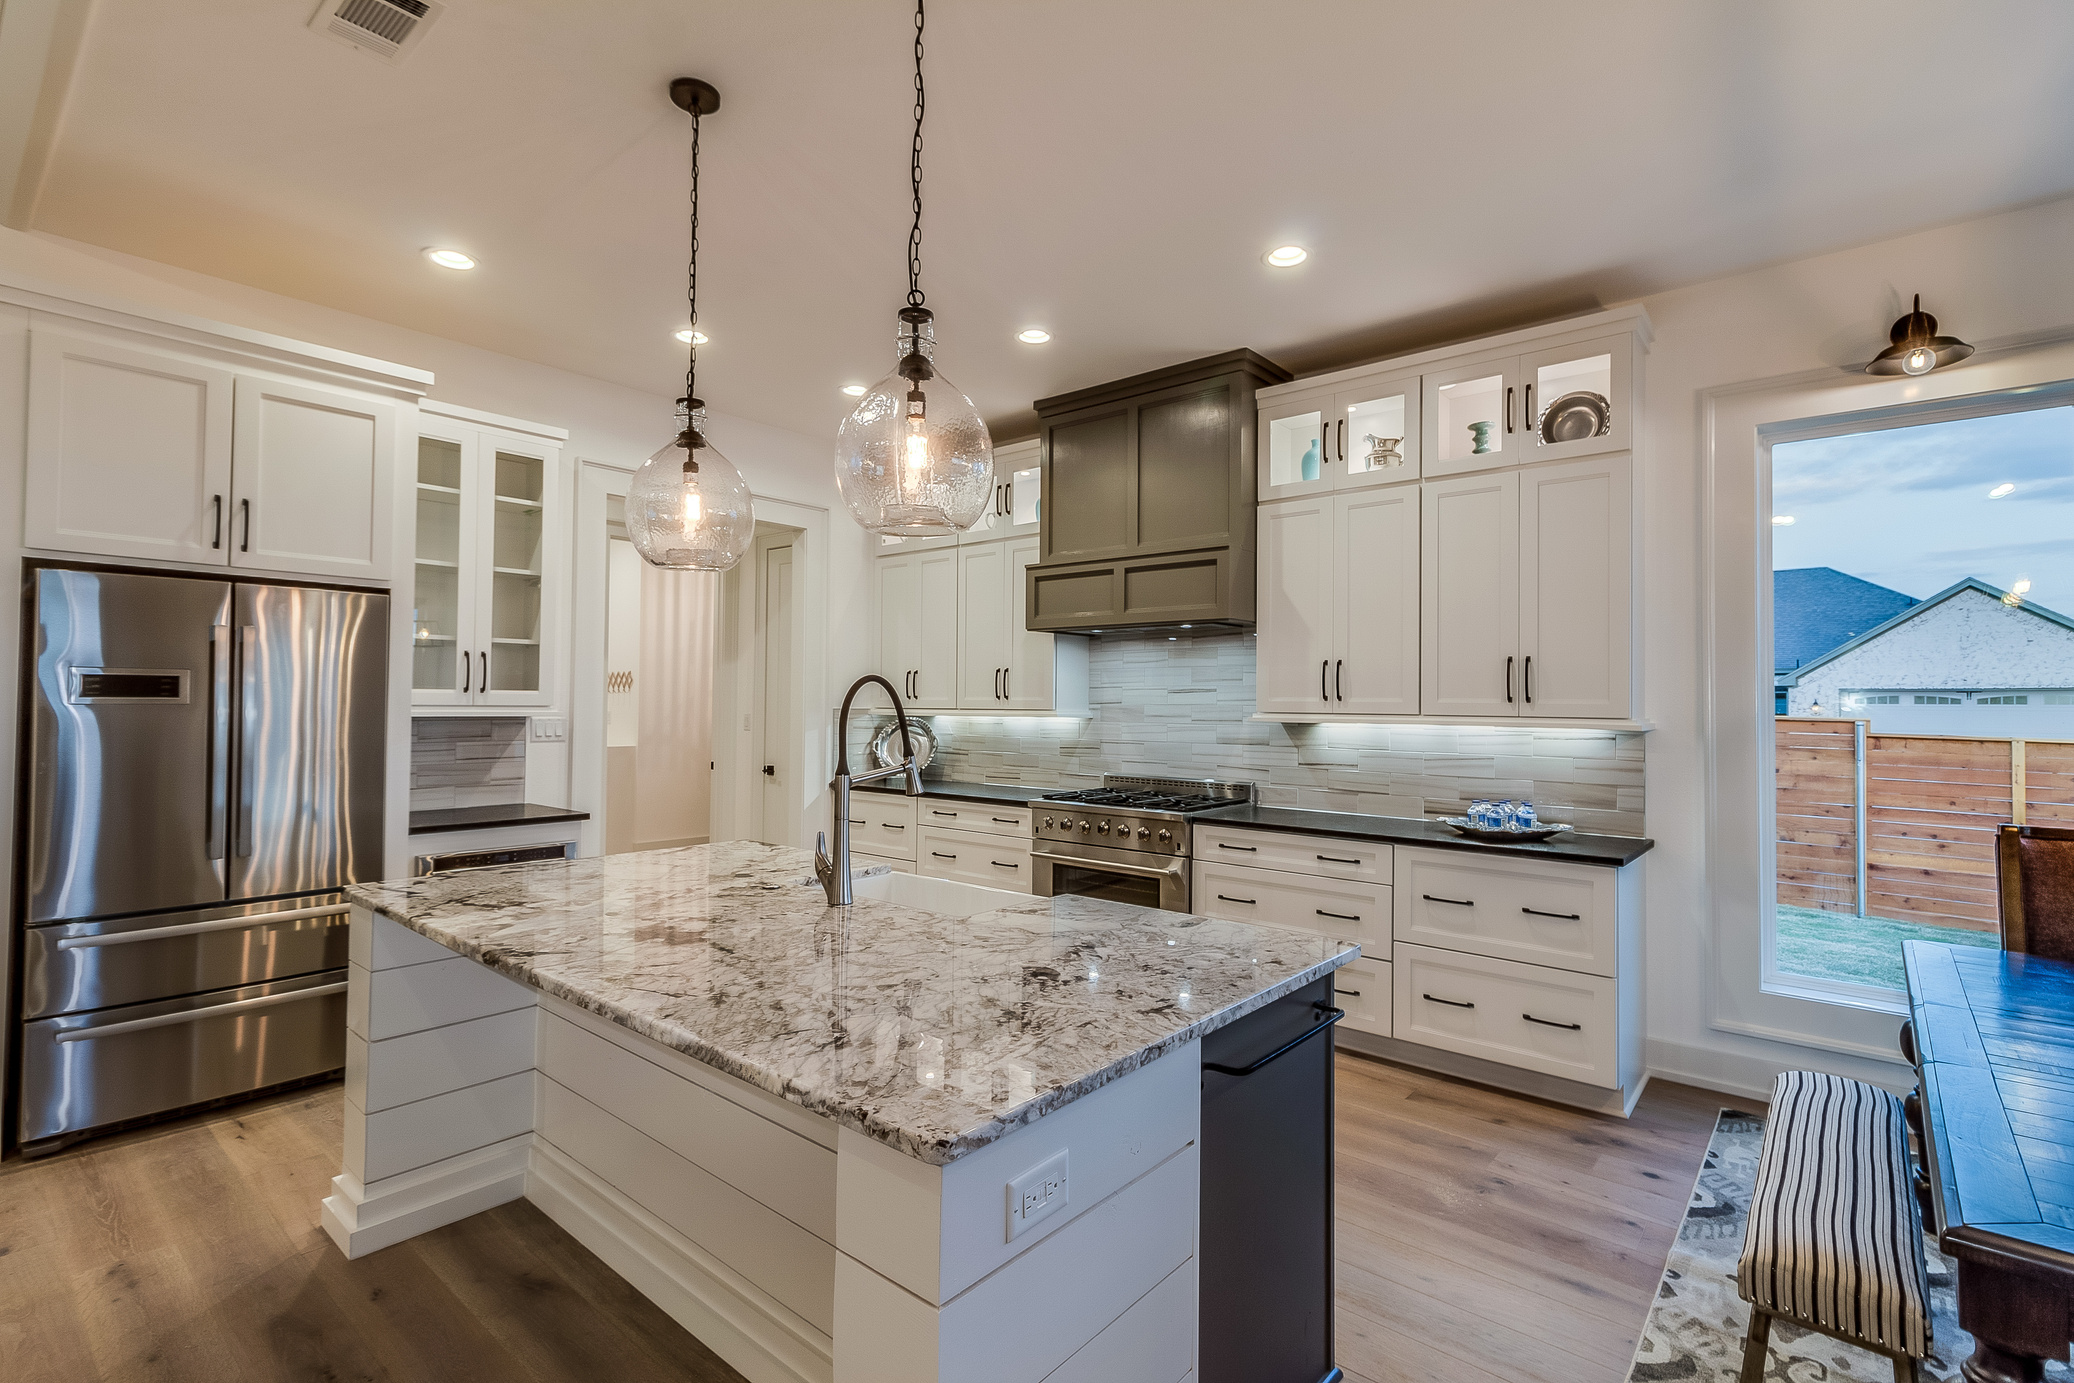 Granite countertops and two pendant lights above island